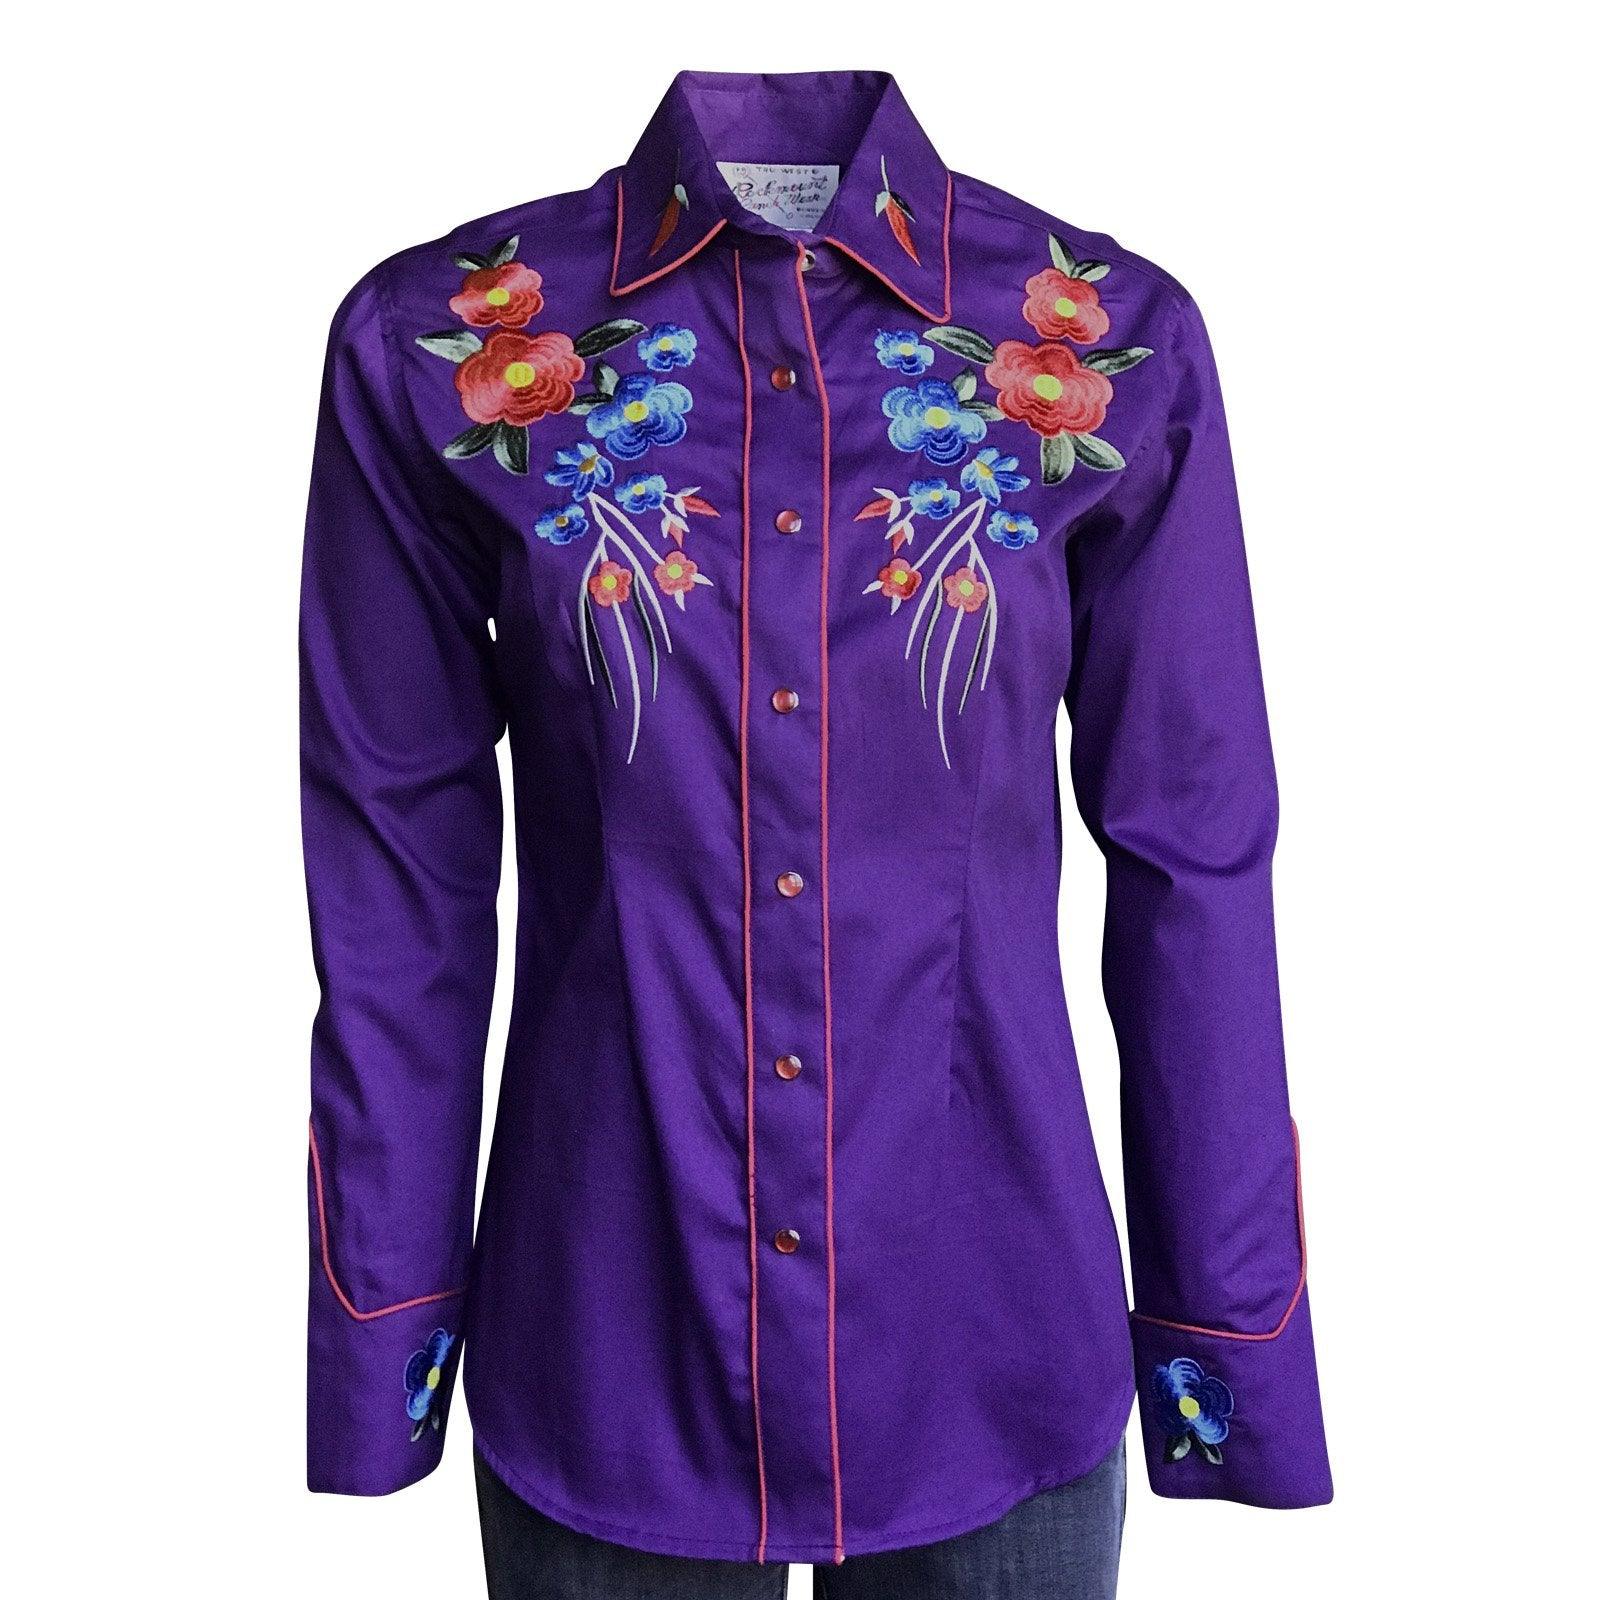 Women's Vintage Floral Bouquet Embroidered Western Shirt in Purple - Flyclothing LLC